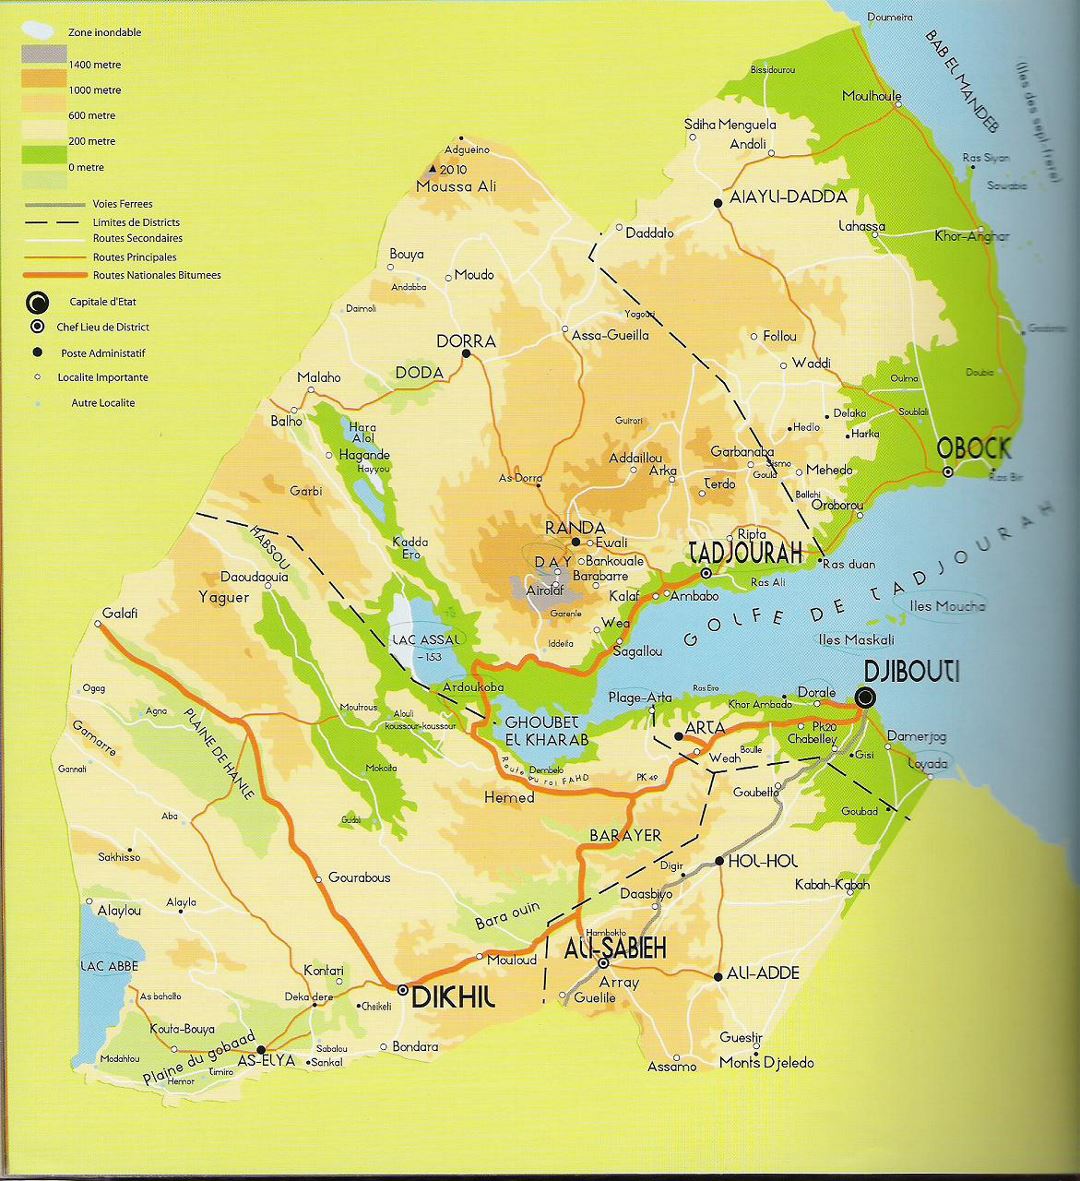 Detailed Elevation Map Of Djibouti With Roads And Cities Djibouti